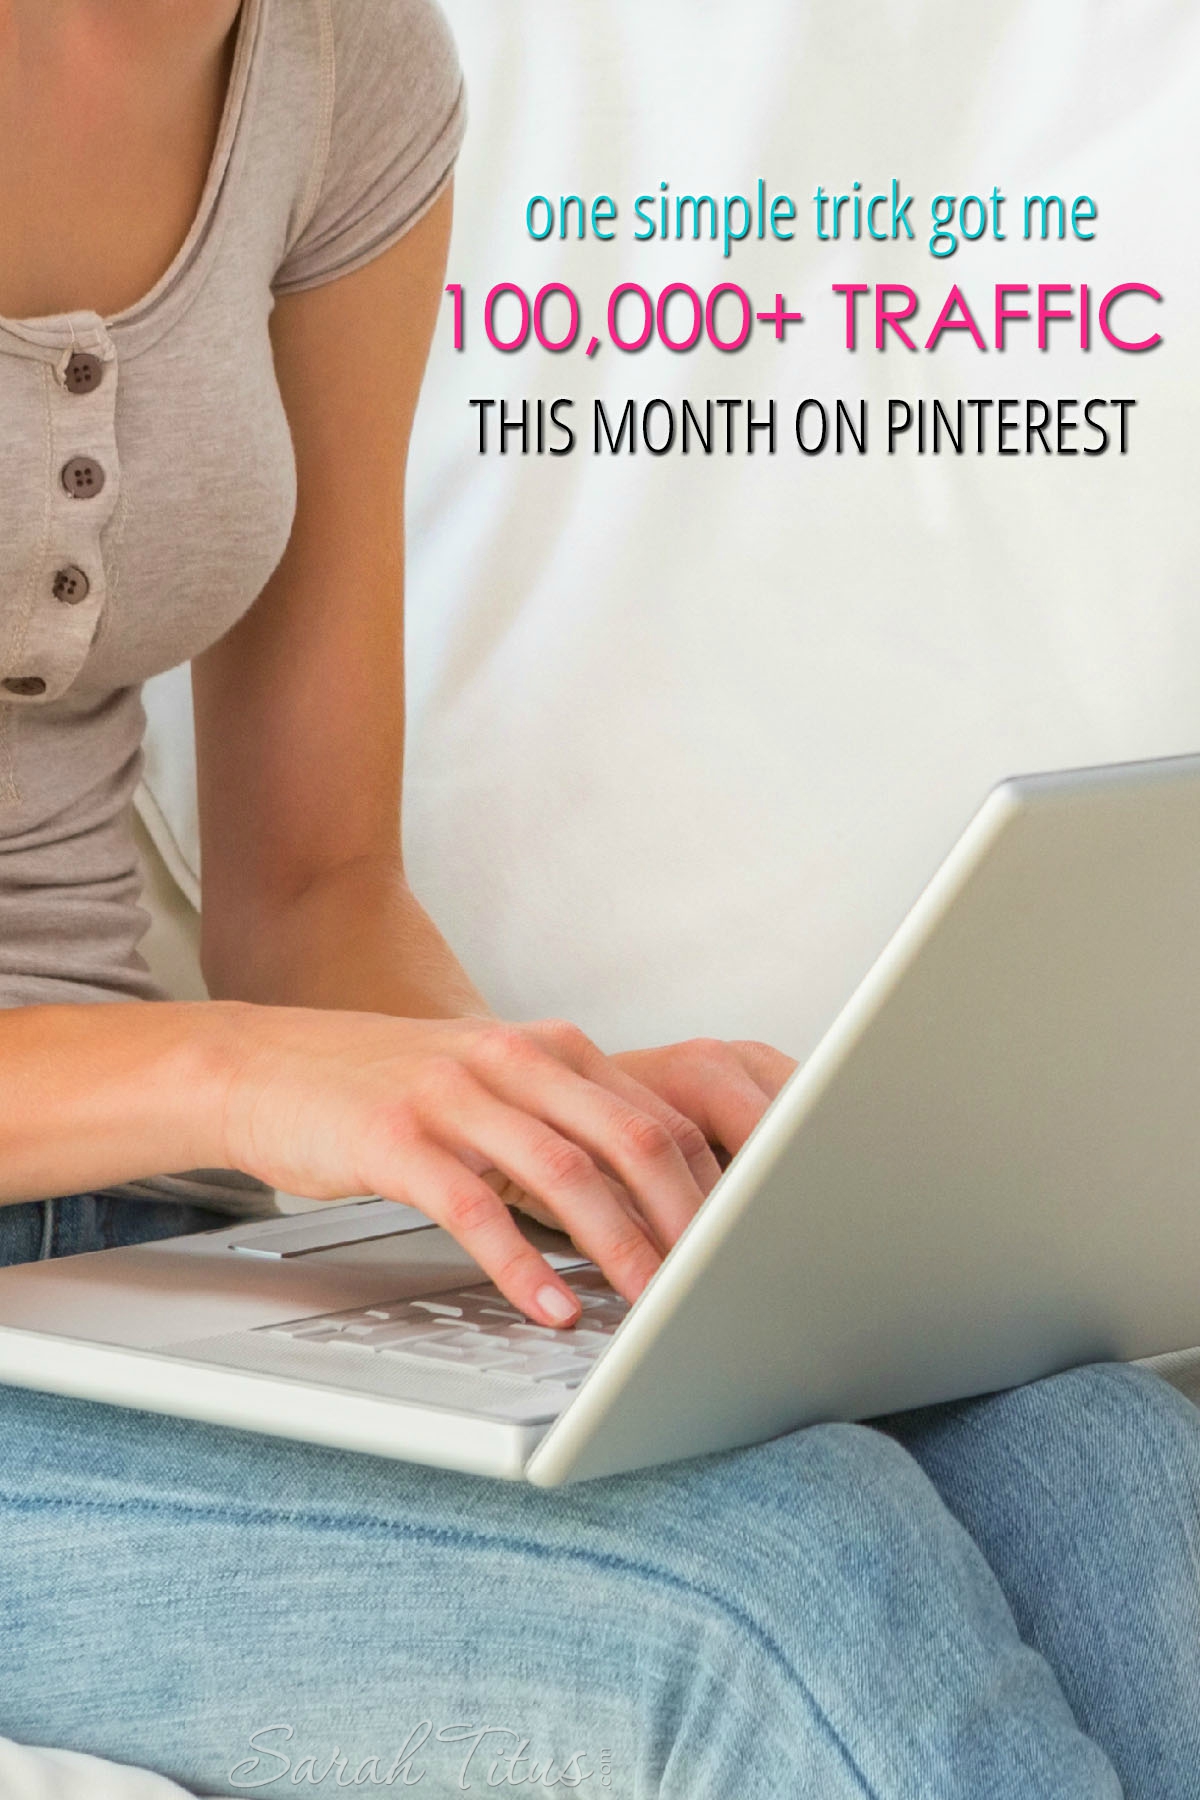 The proof is in the pudding, right?! So, here's my screenshots as I share with you how this one simple trick got me 100,000+ traffic this month on Pinterest